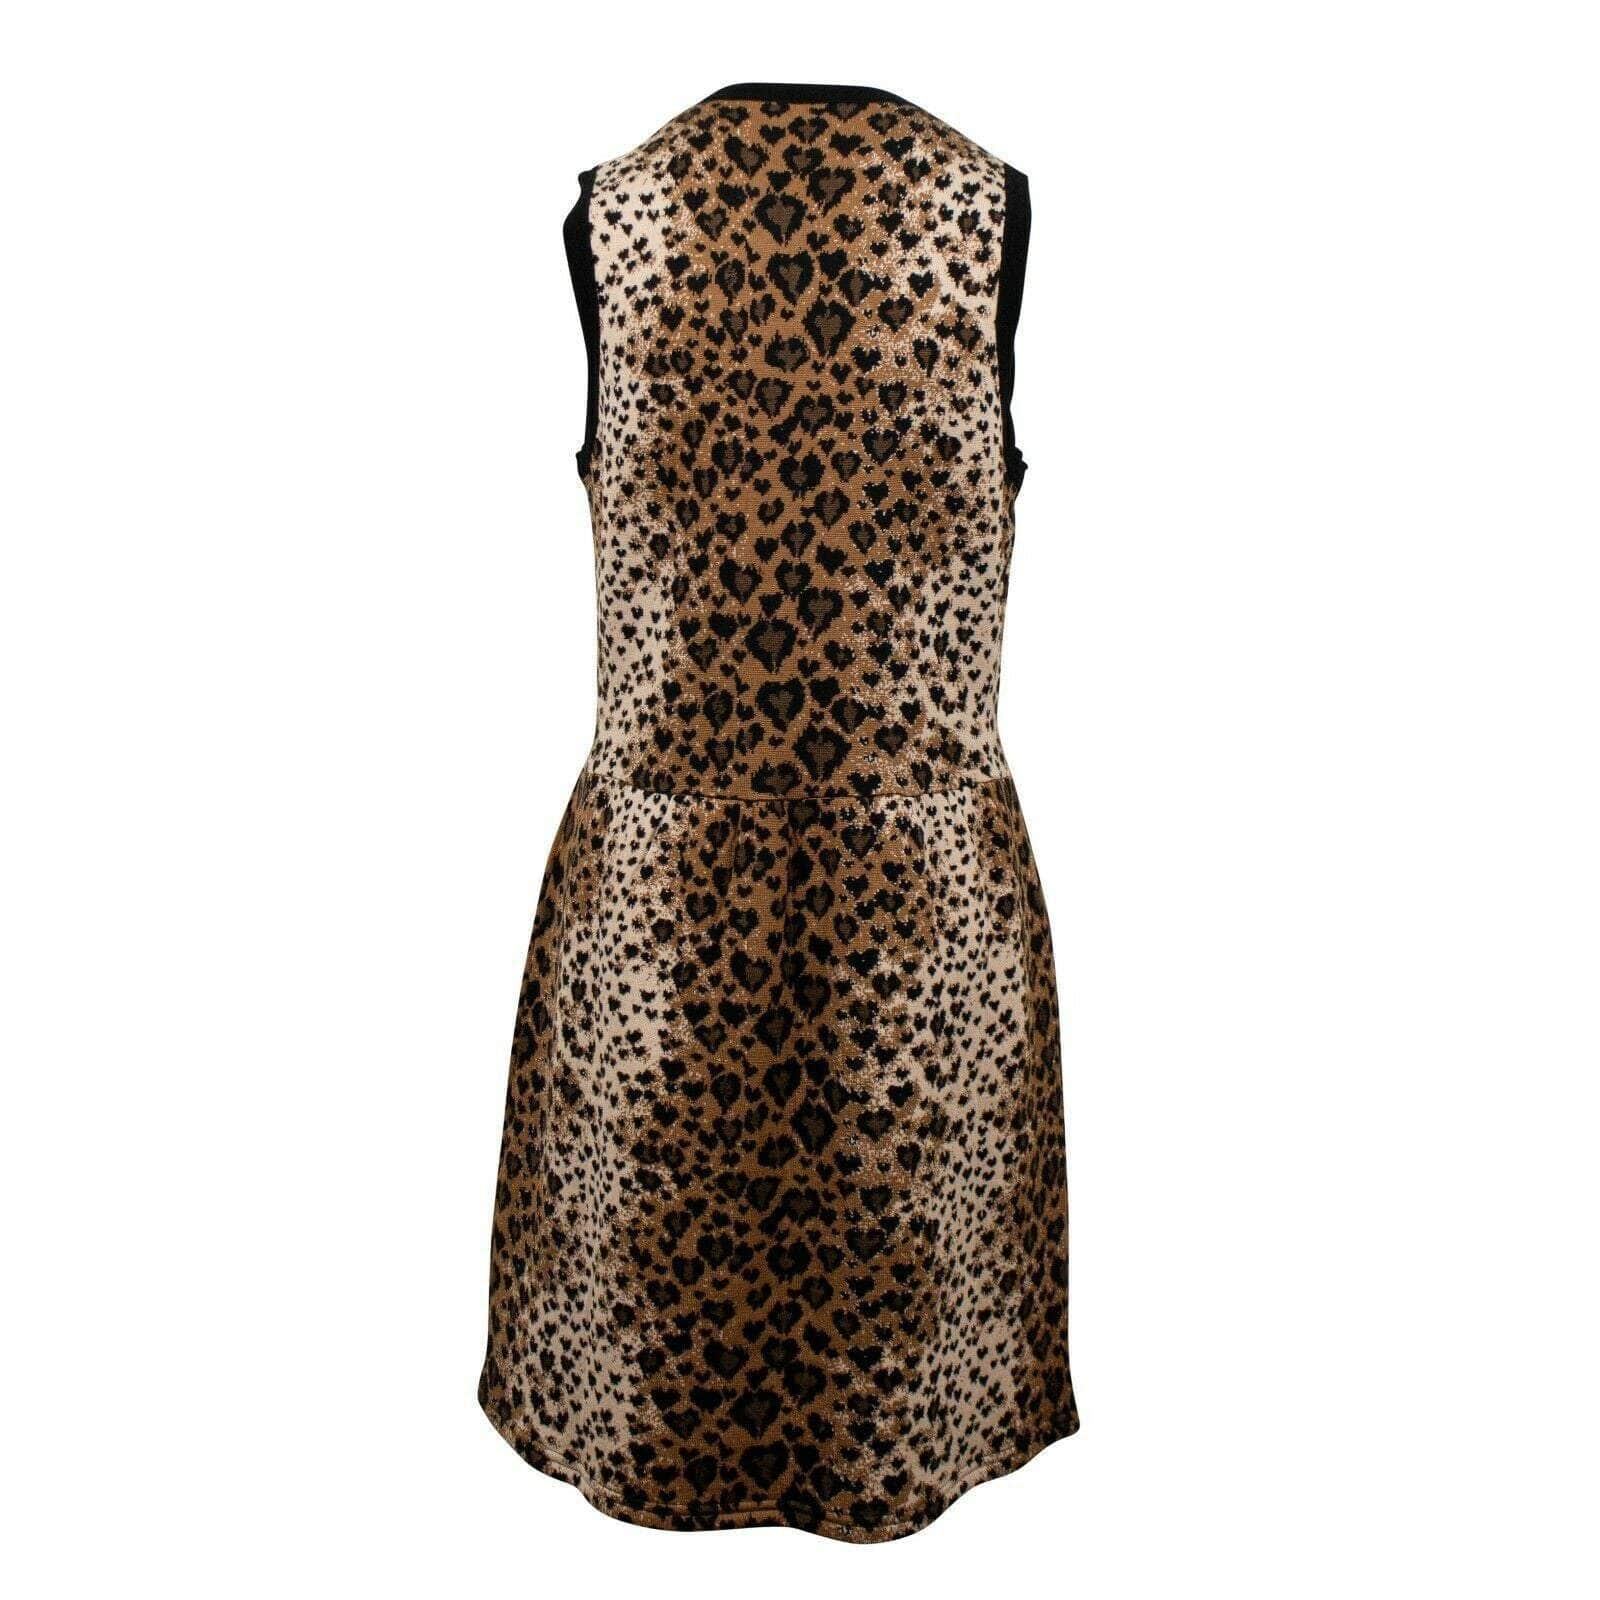 Red Valentino Dresses XS Fit And Flare Leopard Print Sleeveless Dress - Brown 67V-546/XS 67V-546/XS